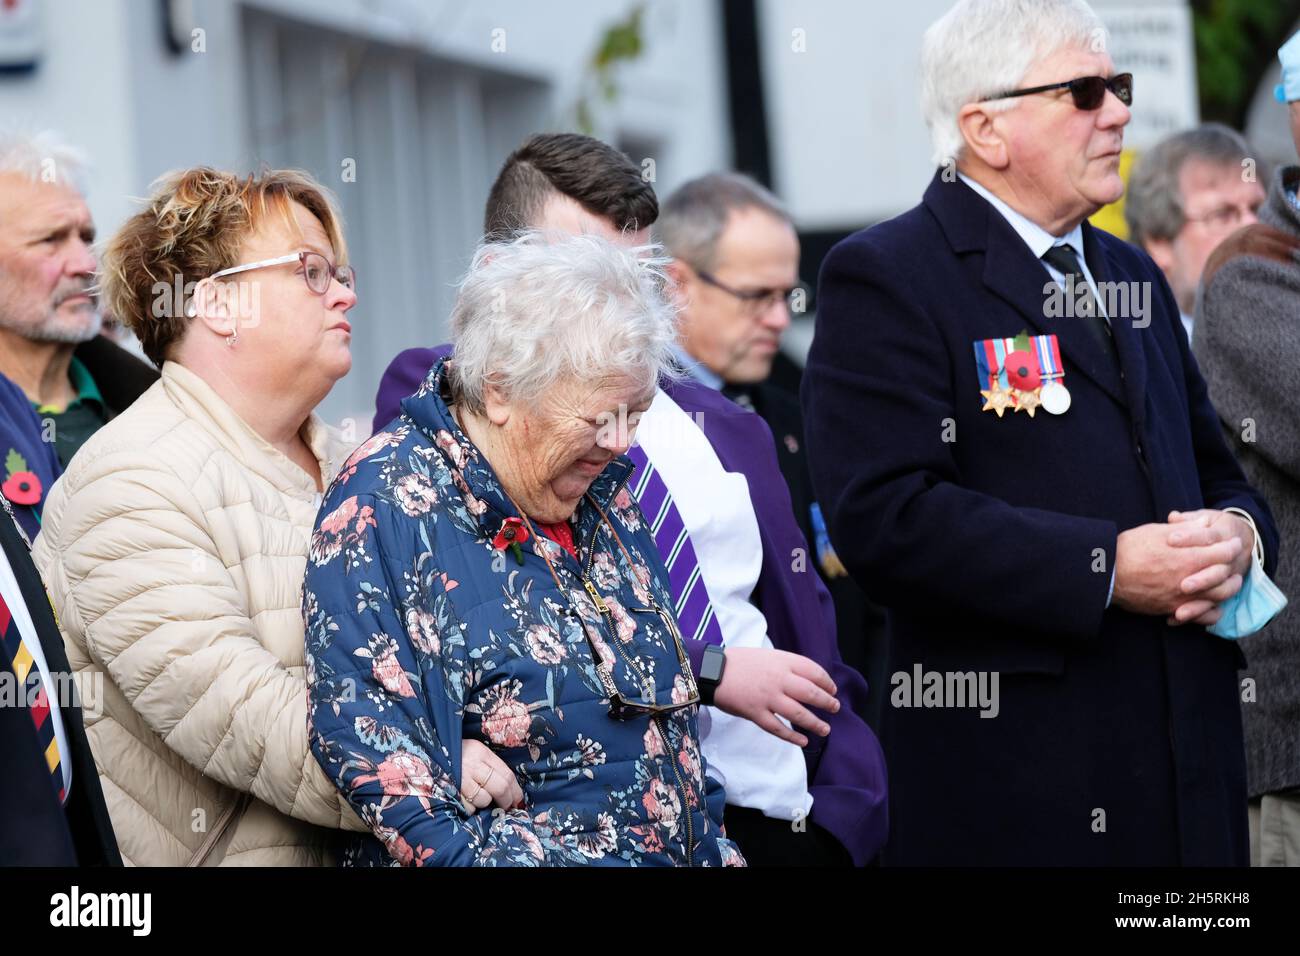 Hereford, Herefordshire, UK - Thursday 11th November 2021 - Veterans gather at the Remembrance Day service in Hereford to remember fallen comrades - Photo Steven May / Alamy Live News Stock Photo